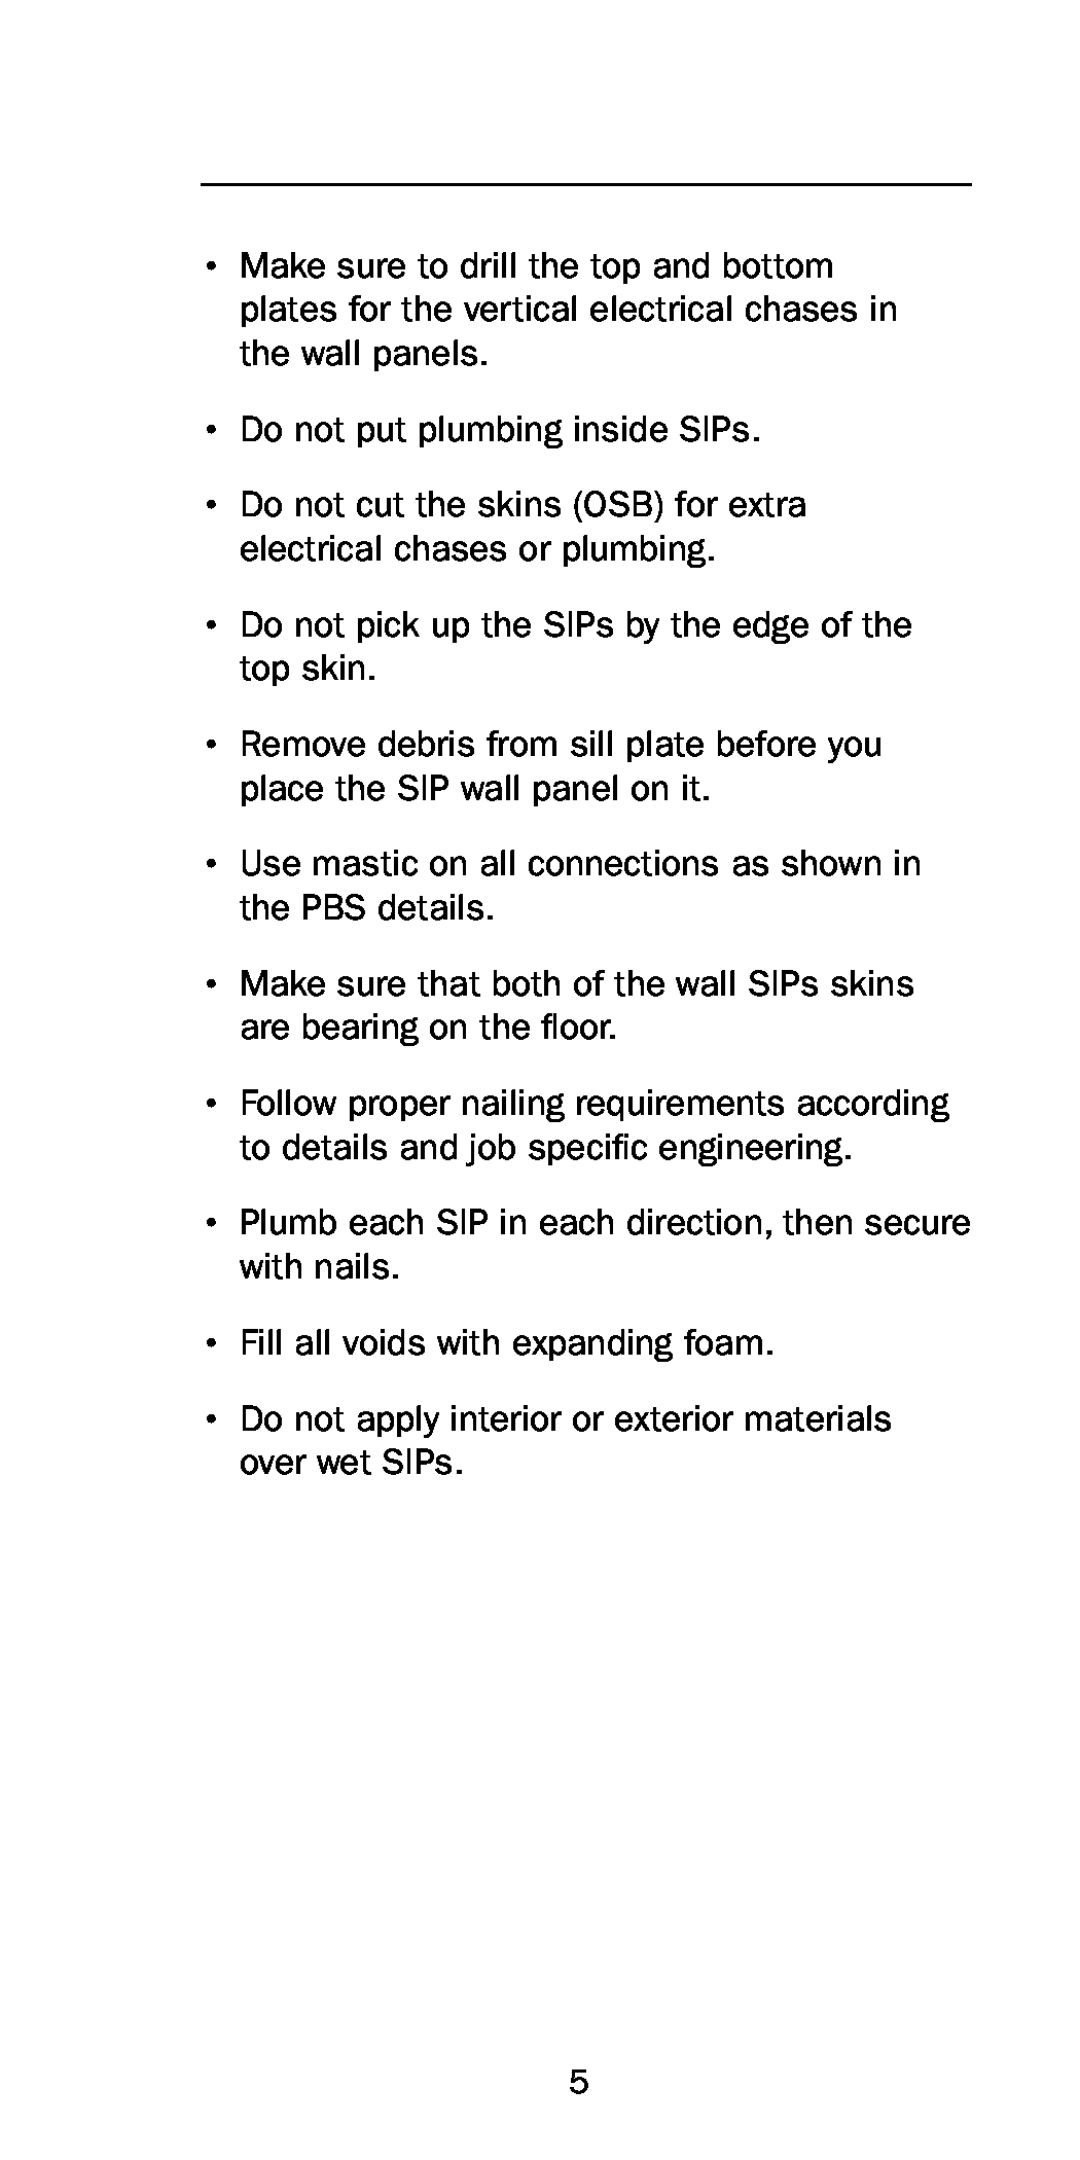 Premier Floors manual Do not put plumbing inside SIPs, Fill all voids with expanding foam 